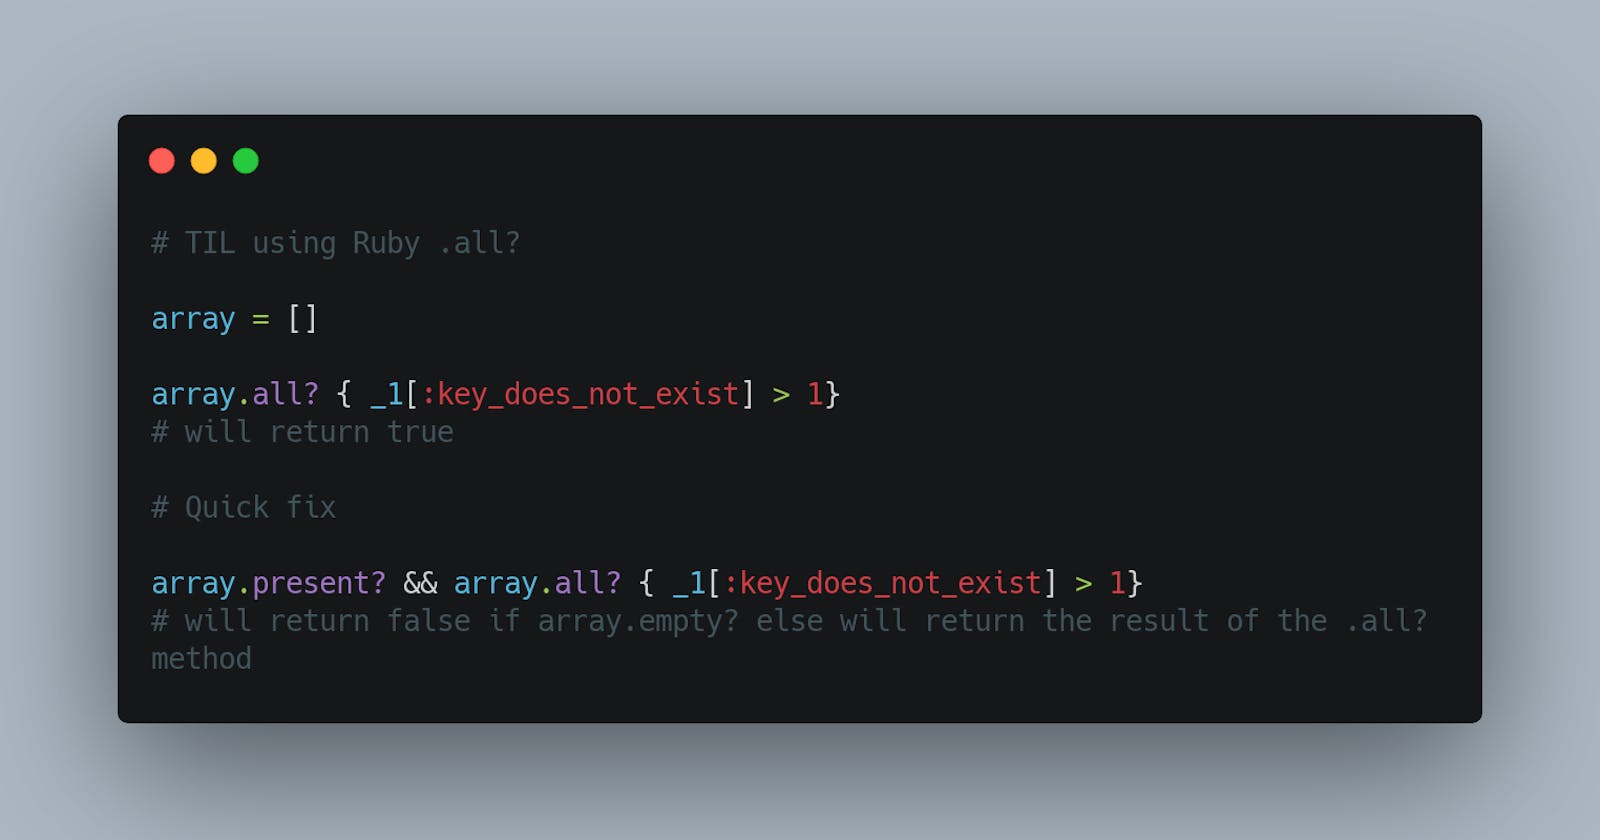 Ruby: Using .all? when the variable can be an empty array